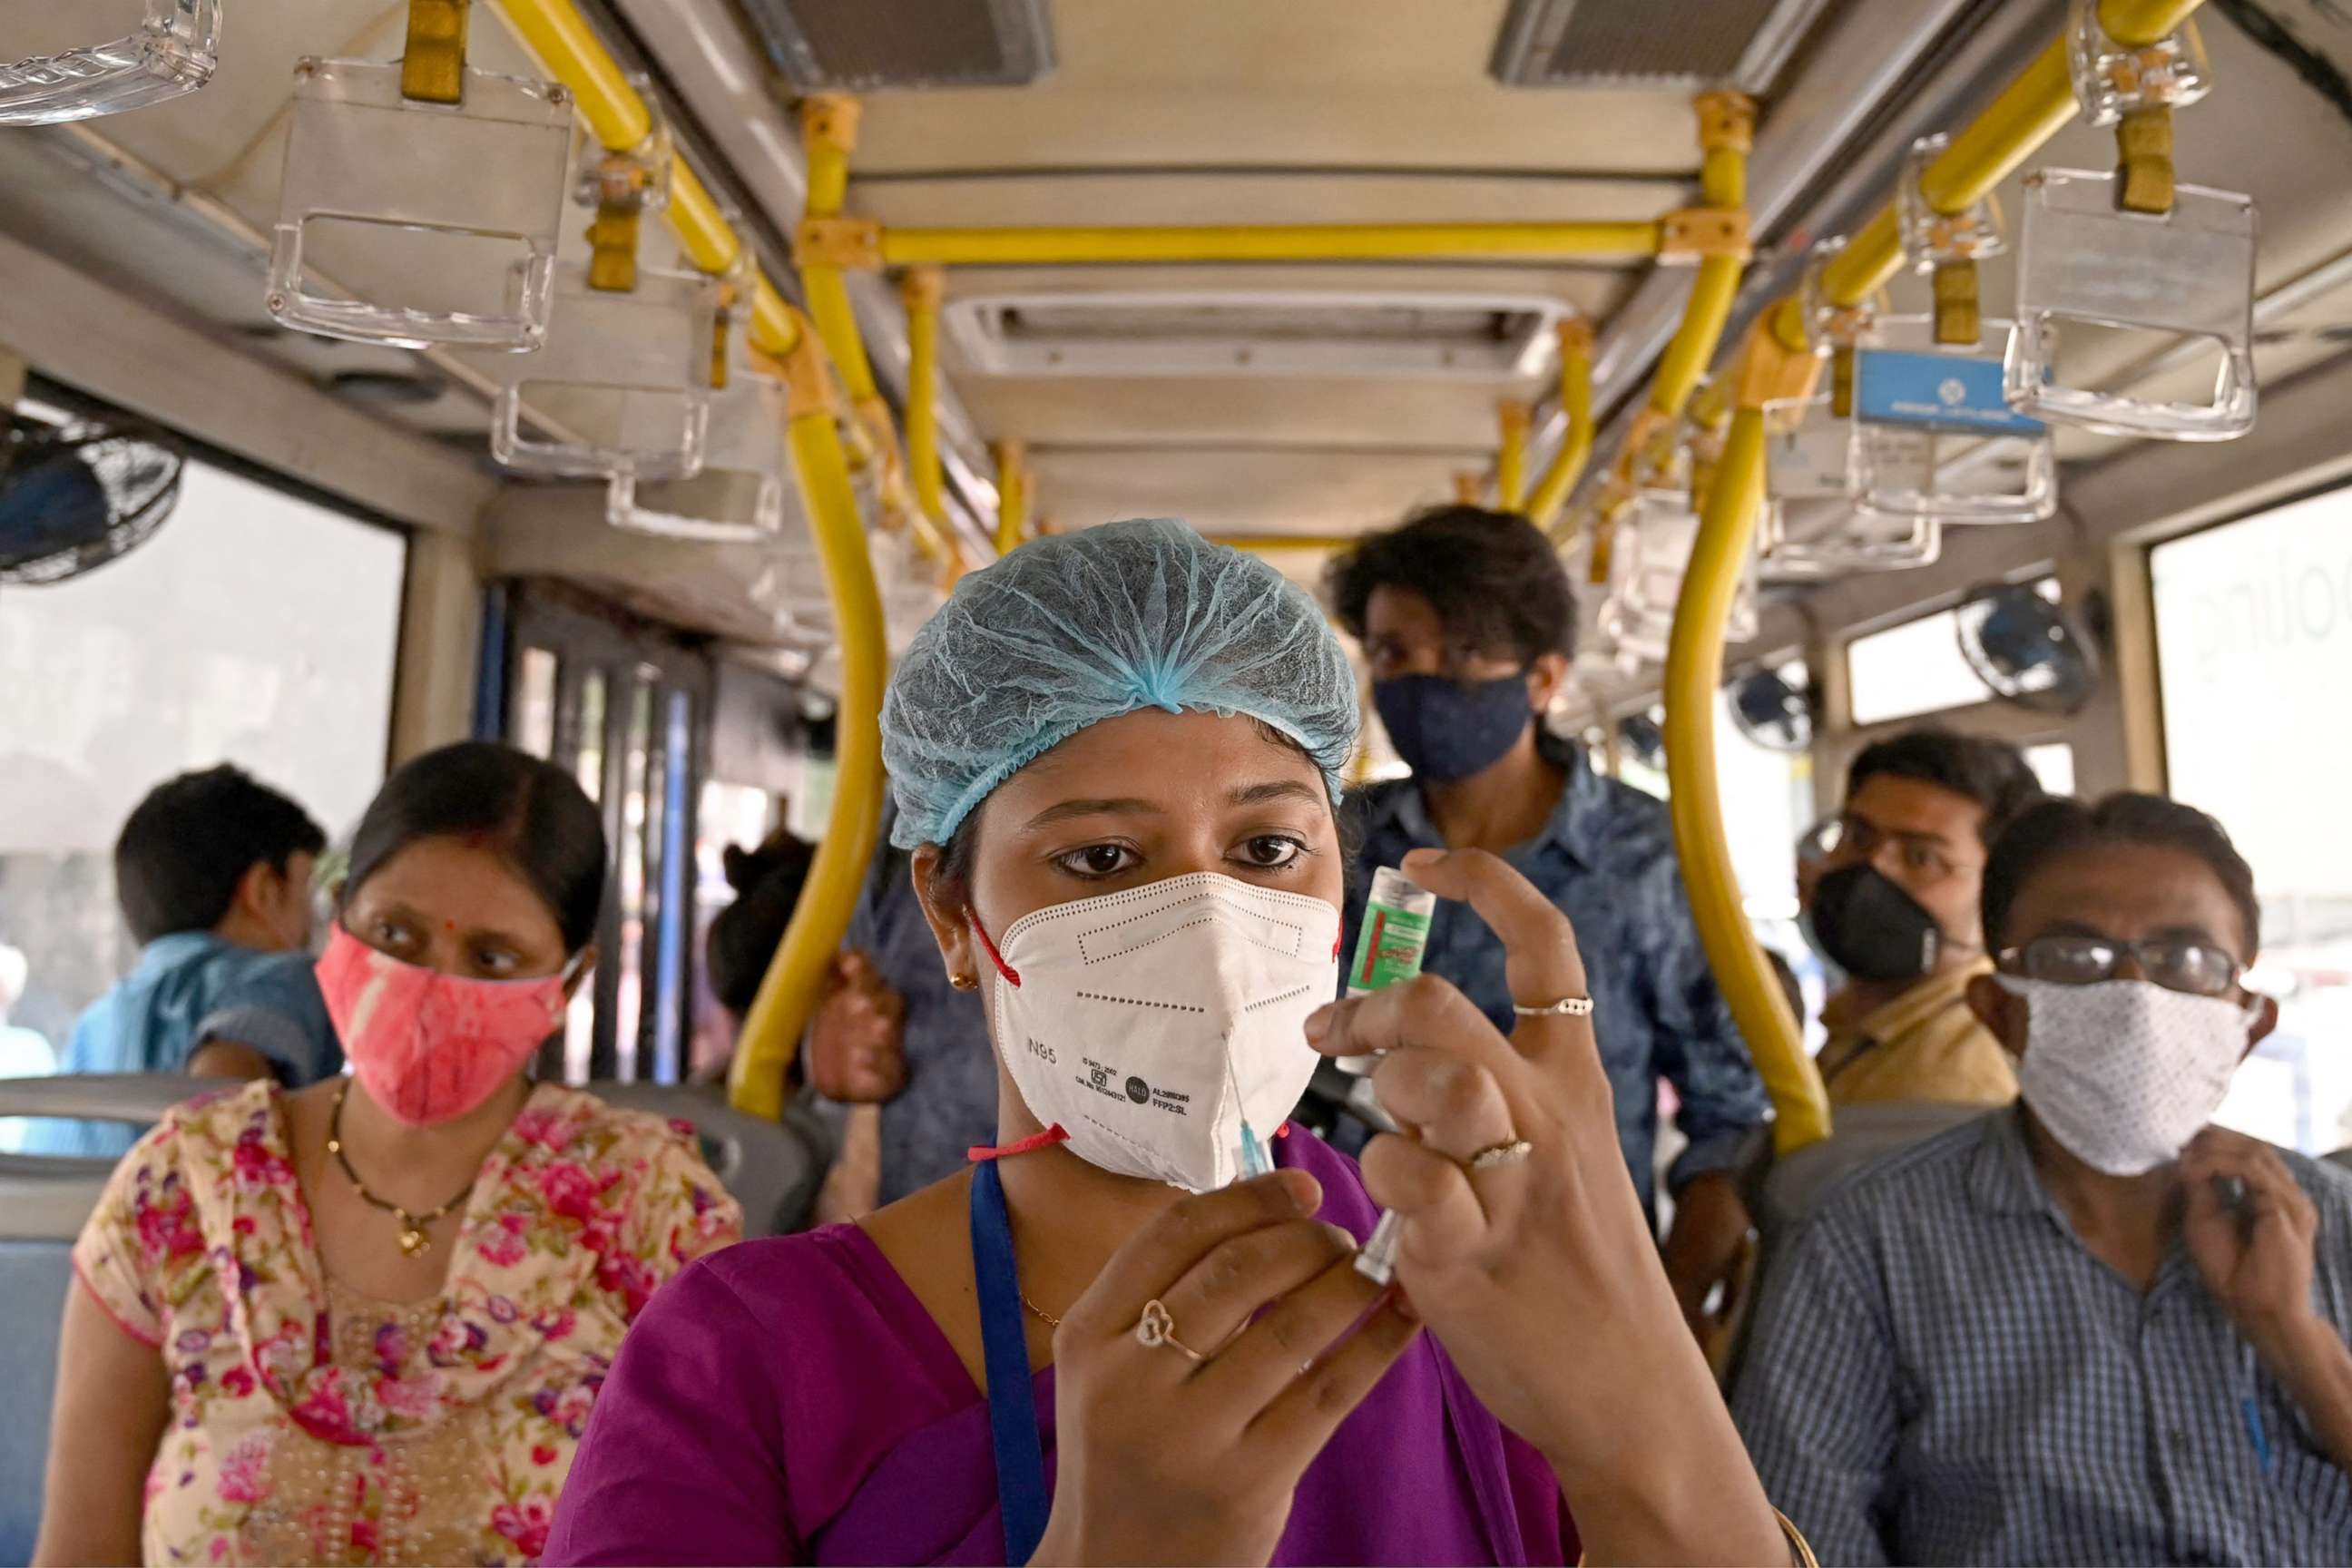 PHOTO:A health worker prepares to administer a vaccine against the COVID-19 virus in a passenger bus converted into a mobile vaccination centre in Kolkata, June 3, 2021.